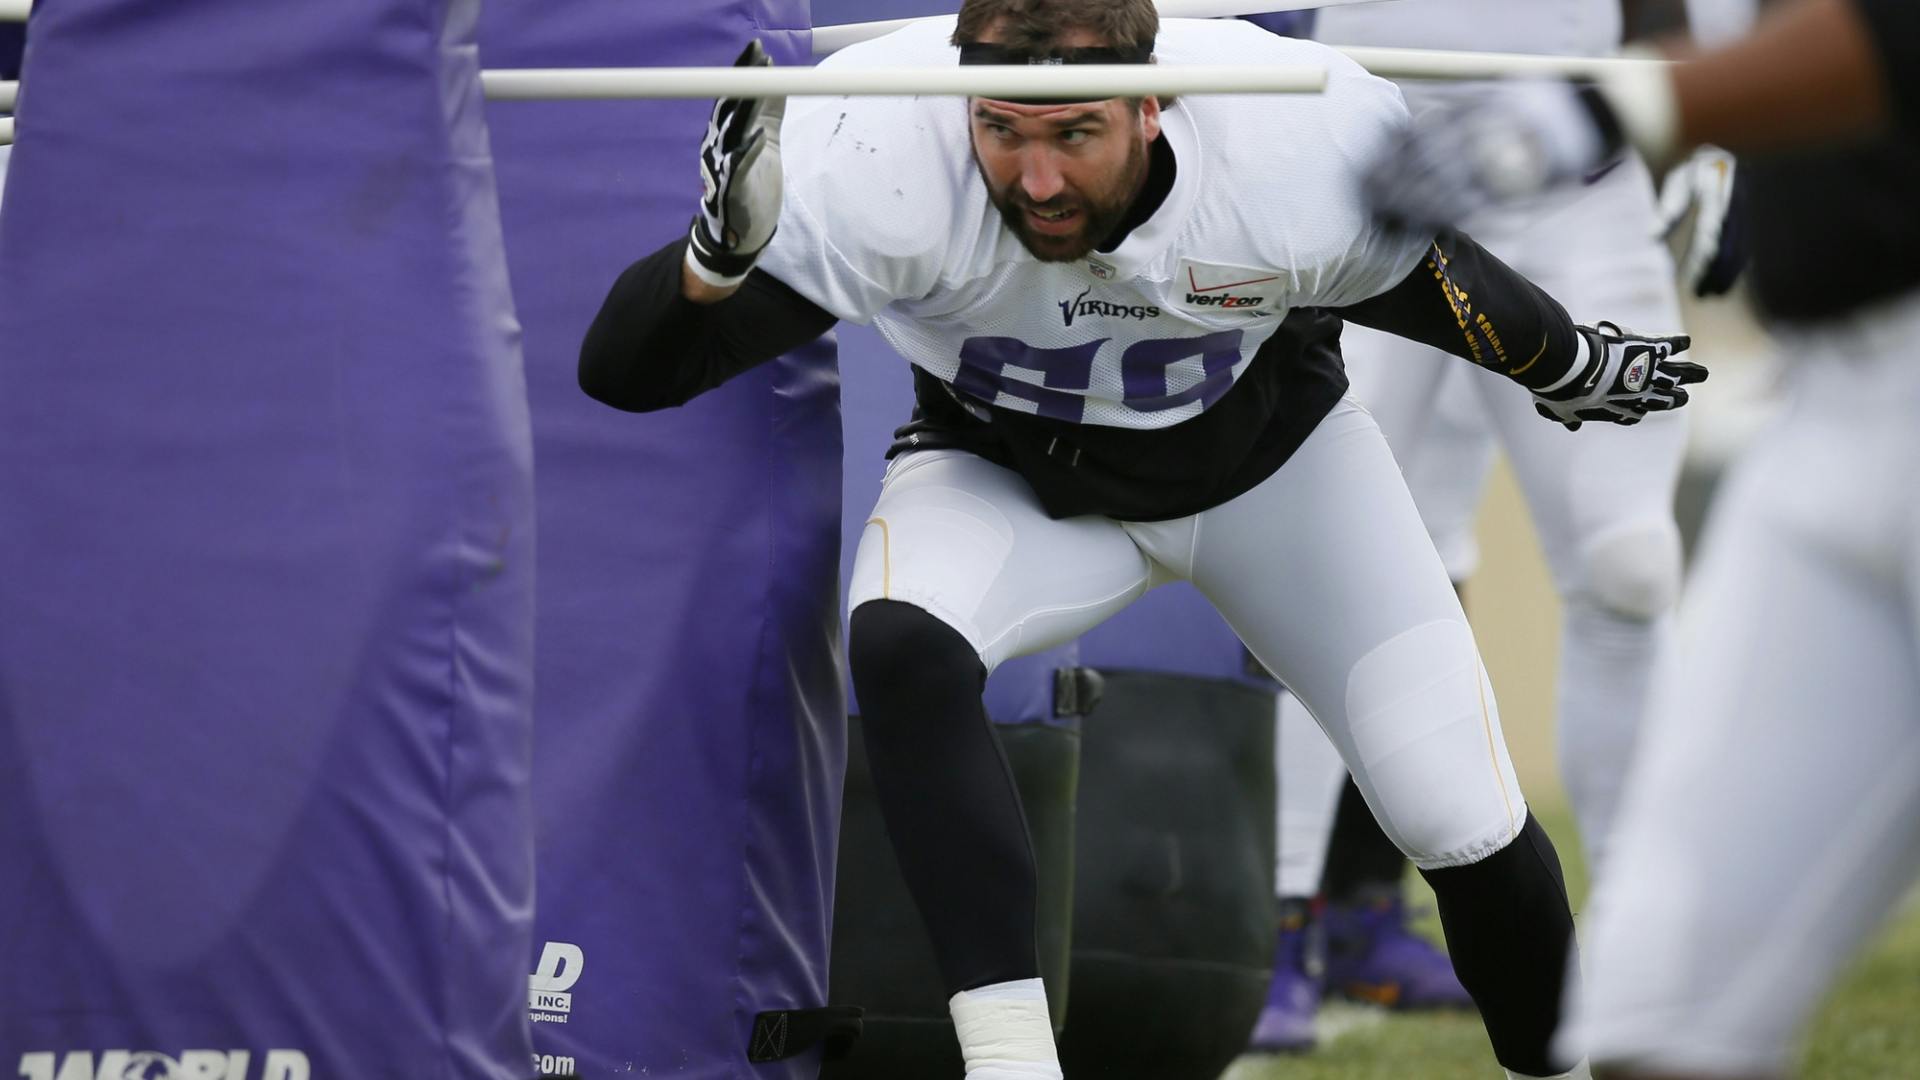 Defensive end Jared Allen talks about the Saturday night scrimmage and running back Adrian Peterson's 2,500-yard quest.